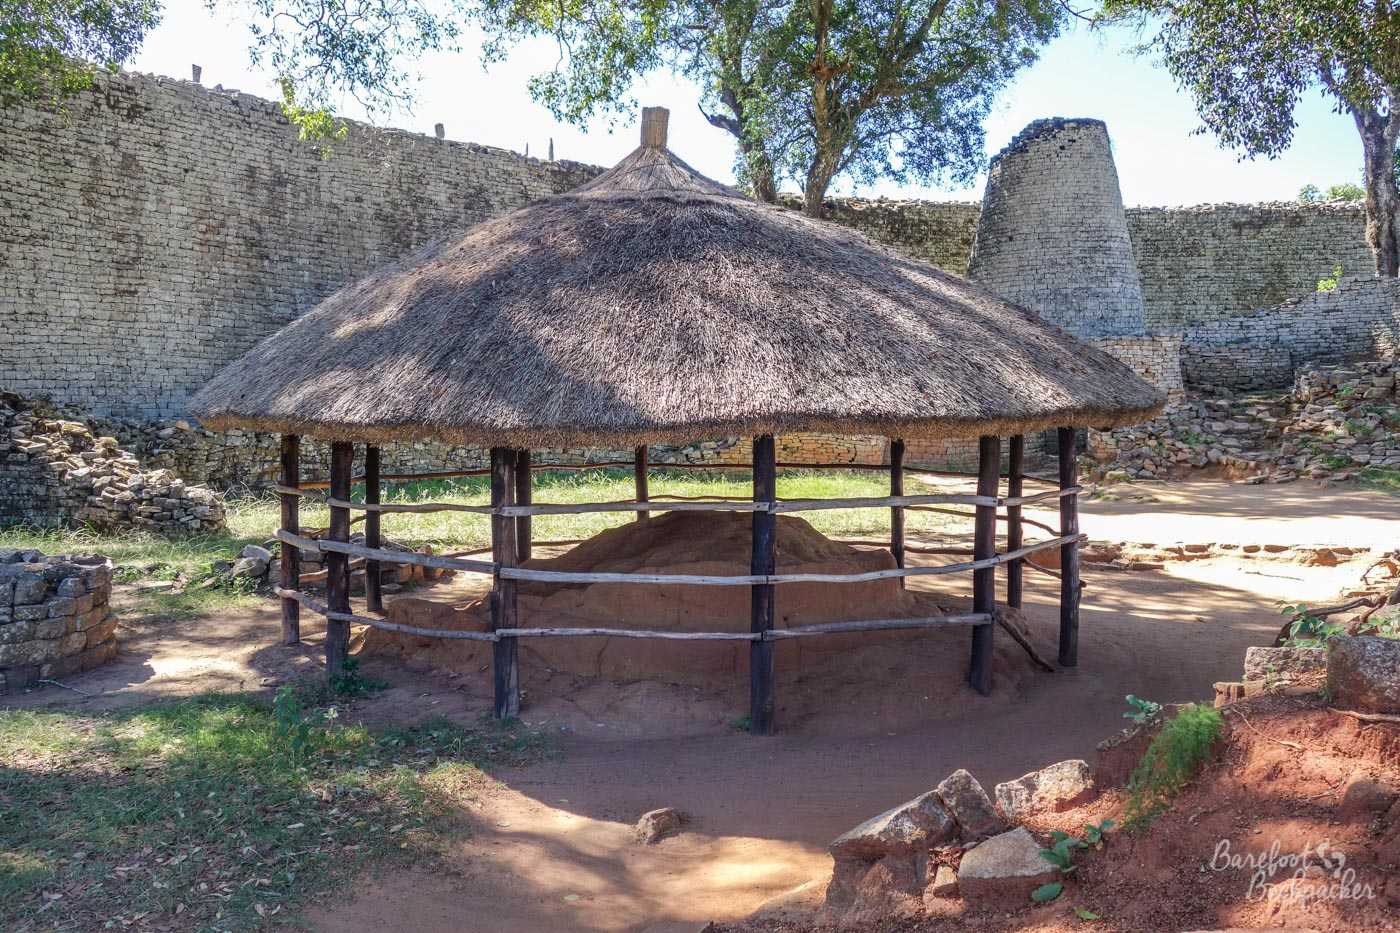 Stone ruins in the Great Enclosure complex at Great Zimbabwe. A meeting or heating rondavel in the foreground, and the large conical tower behind